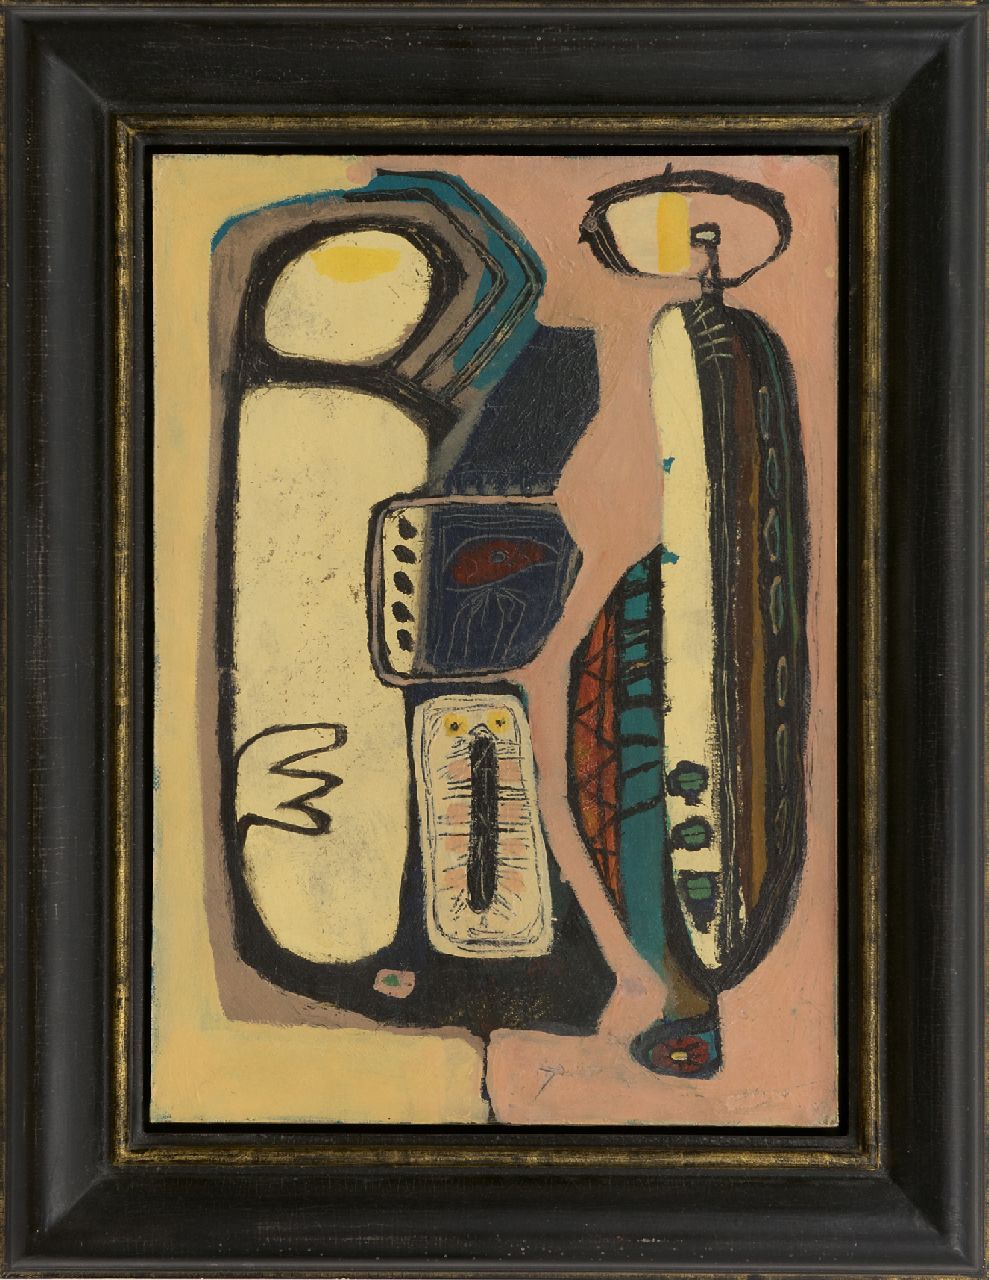 Rooskens J.A.  | Joseph Antoon 'Anton' Rooskens | Paintings offered for sale | Composition, oil on board 49.6 x 35.2 cm, painted ca. mid 50s